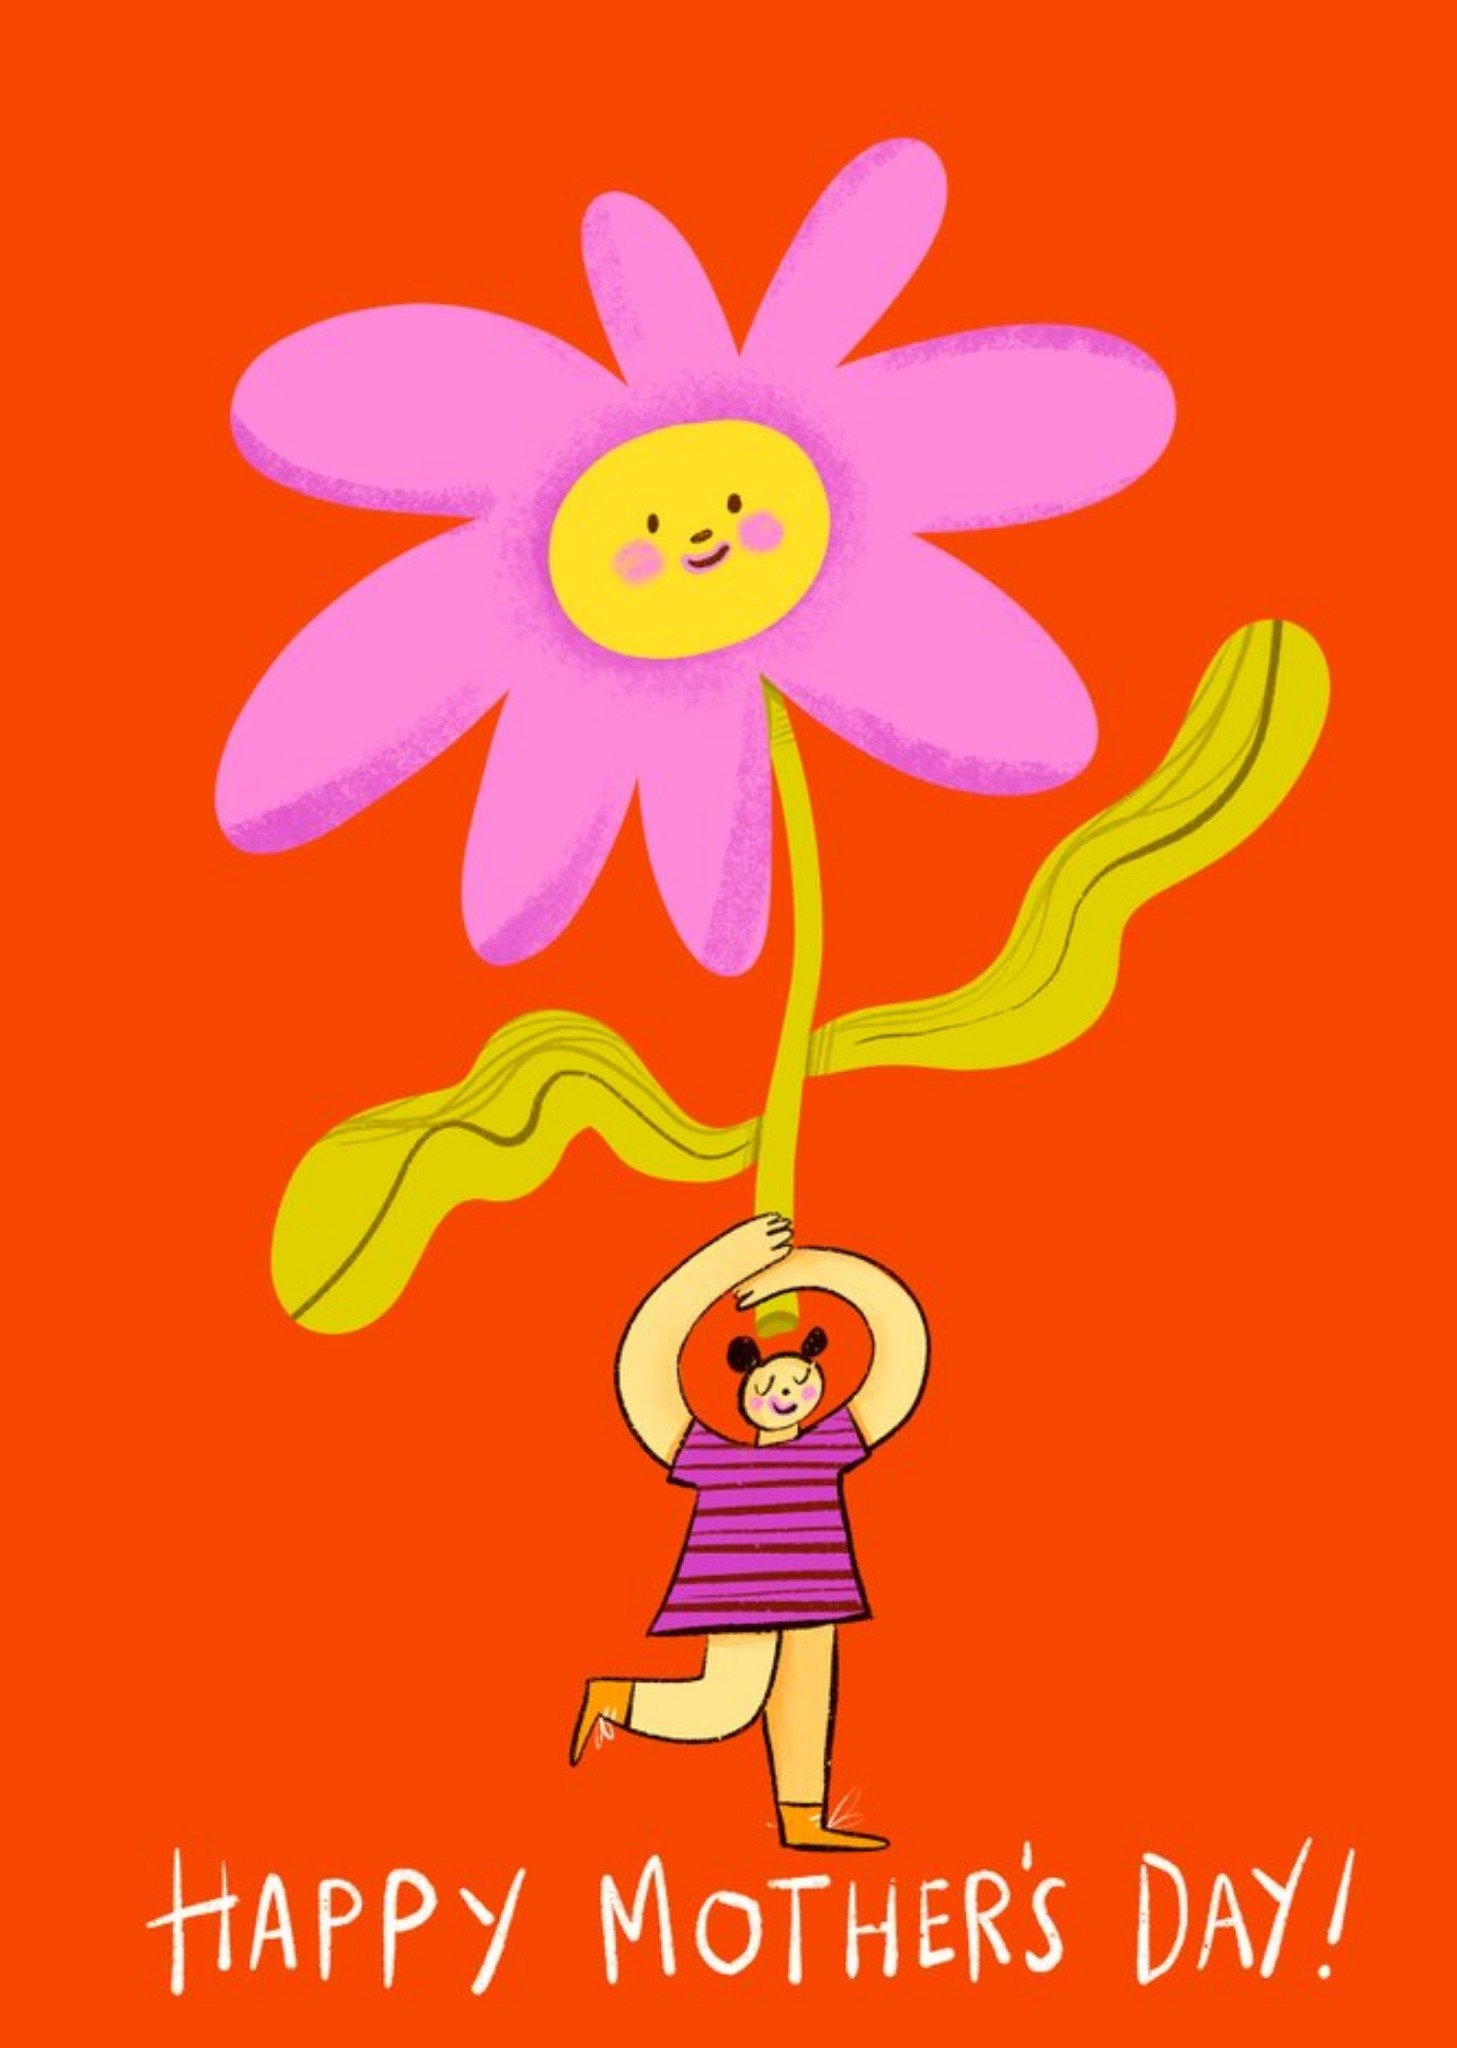 Moonpig Illustration Of A Character Holding Up A Giant Flower On An Orange Background Mothers Day Ca